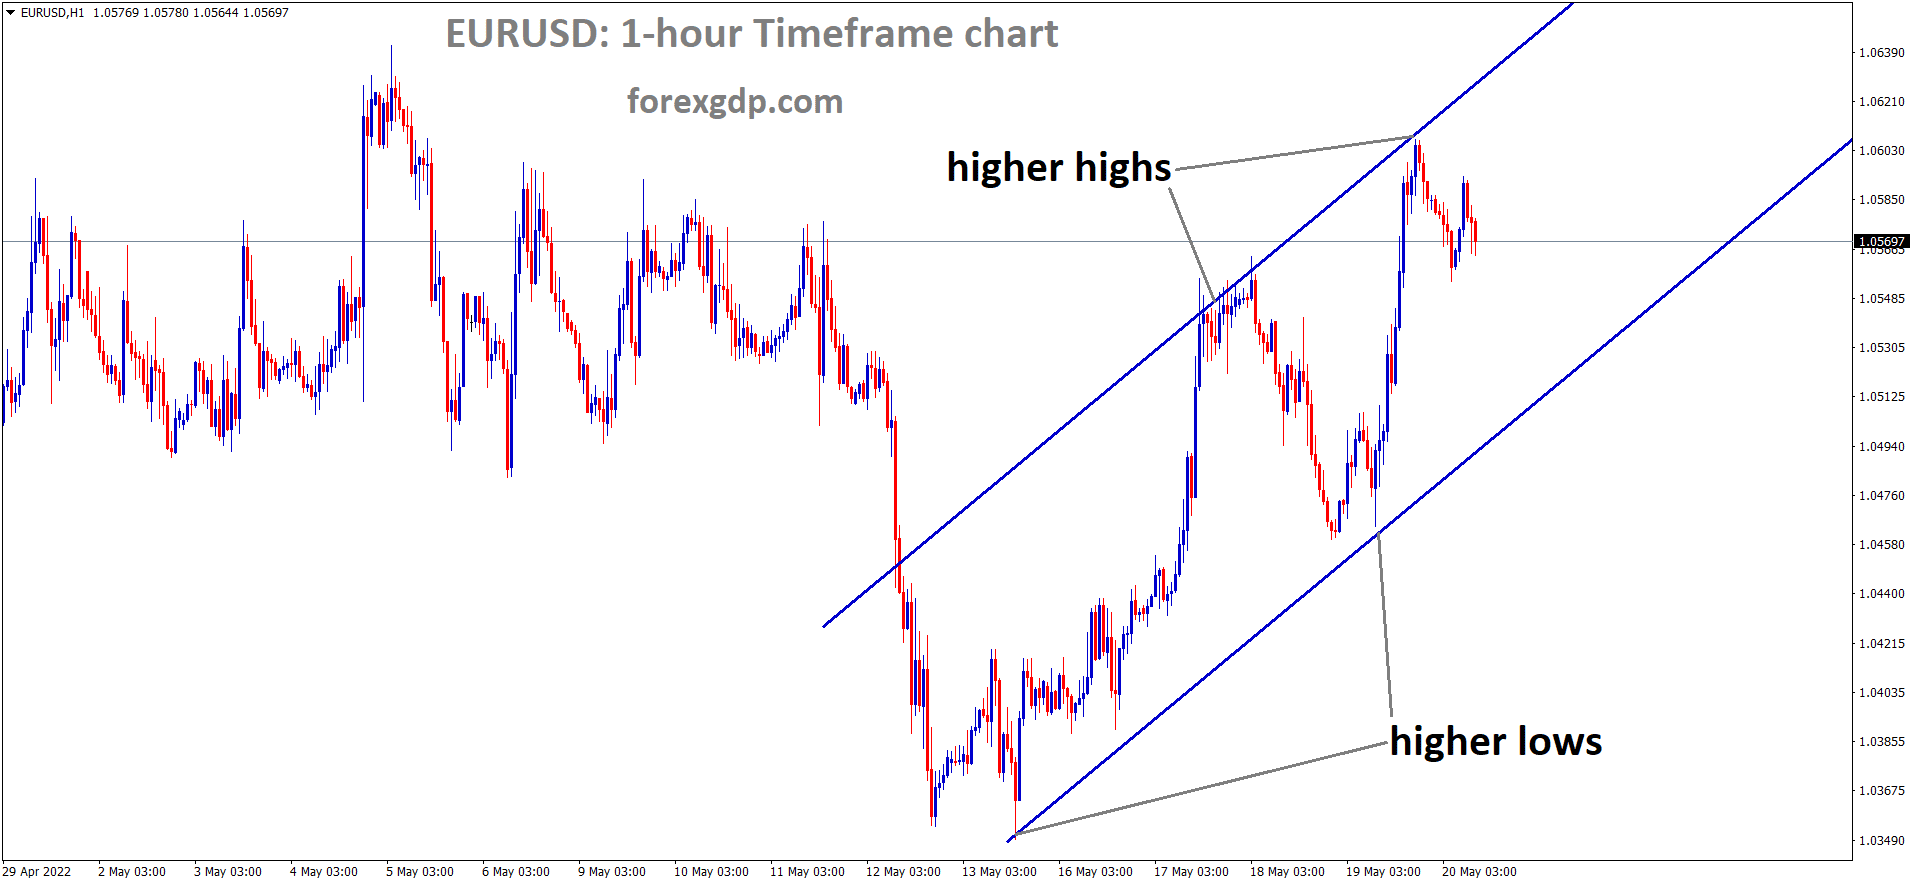 EURUSD H1 Time Frame Analysis Market is moving in an Ascending channel and the Market has Fallen from the higher high area of the channel